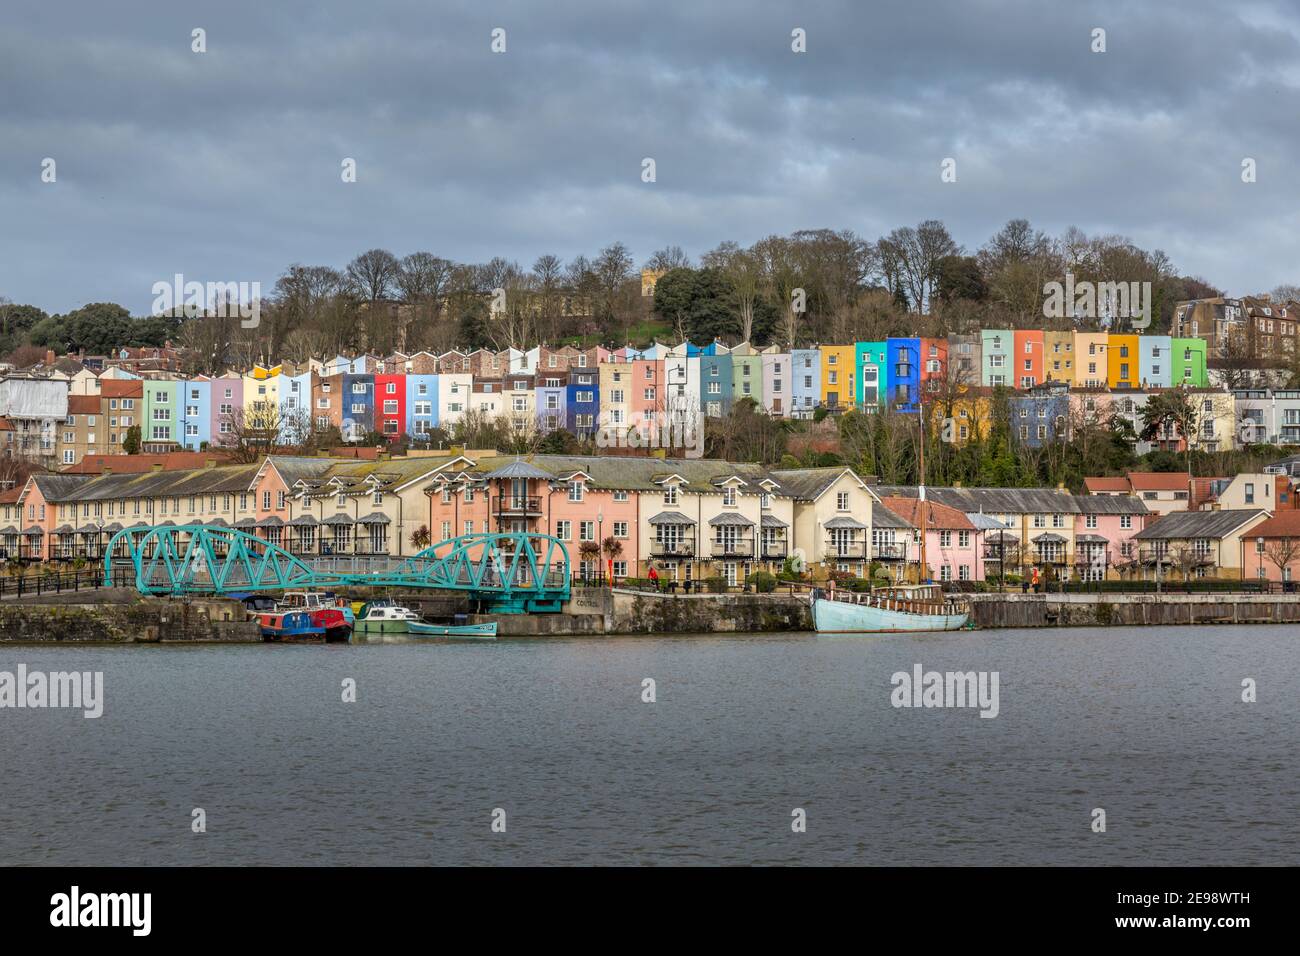 View looking across the River Avon in Bristol, England, towards modern riverside apartments, and colourful older terraced houses behind. Stock Photo